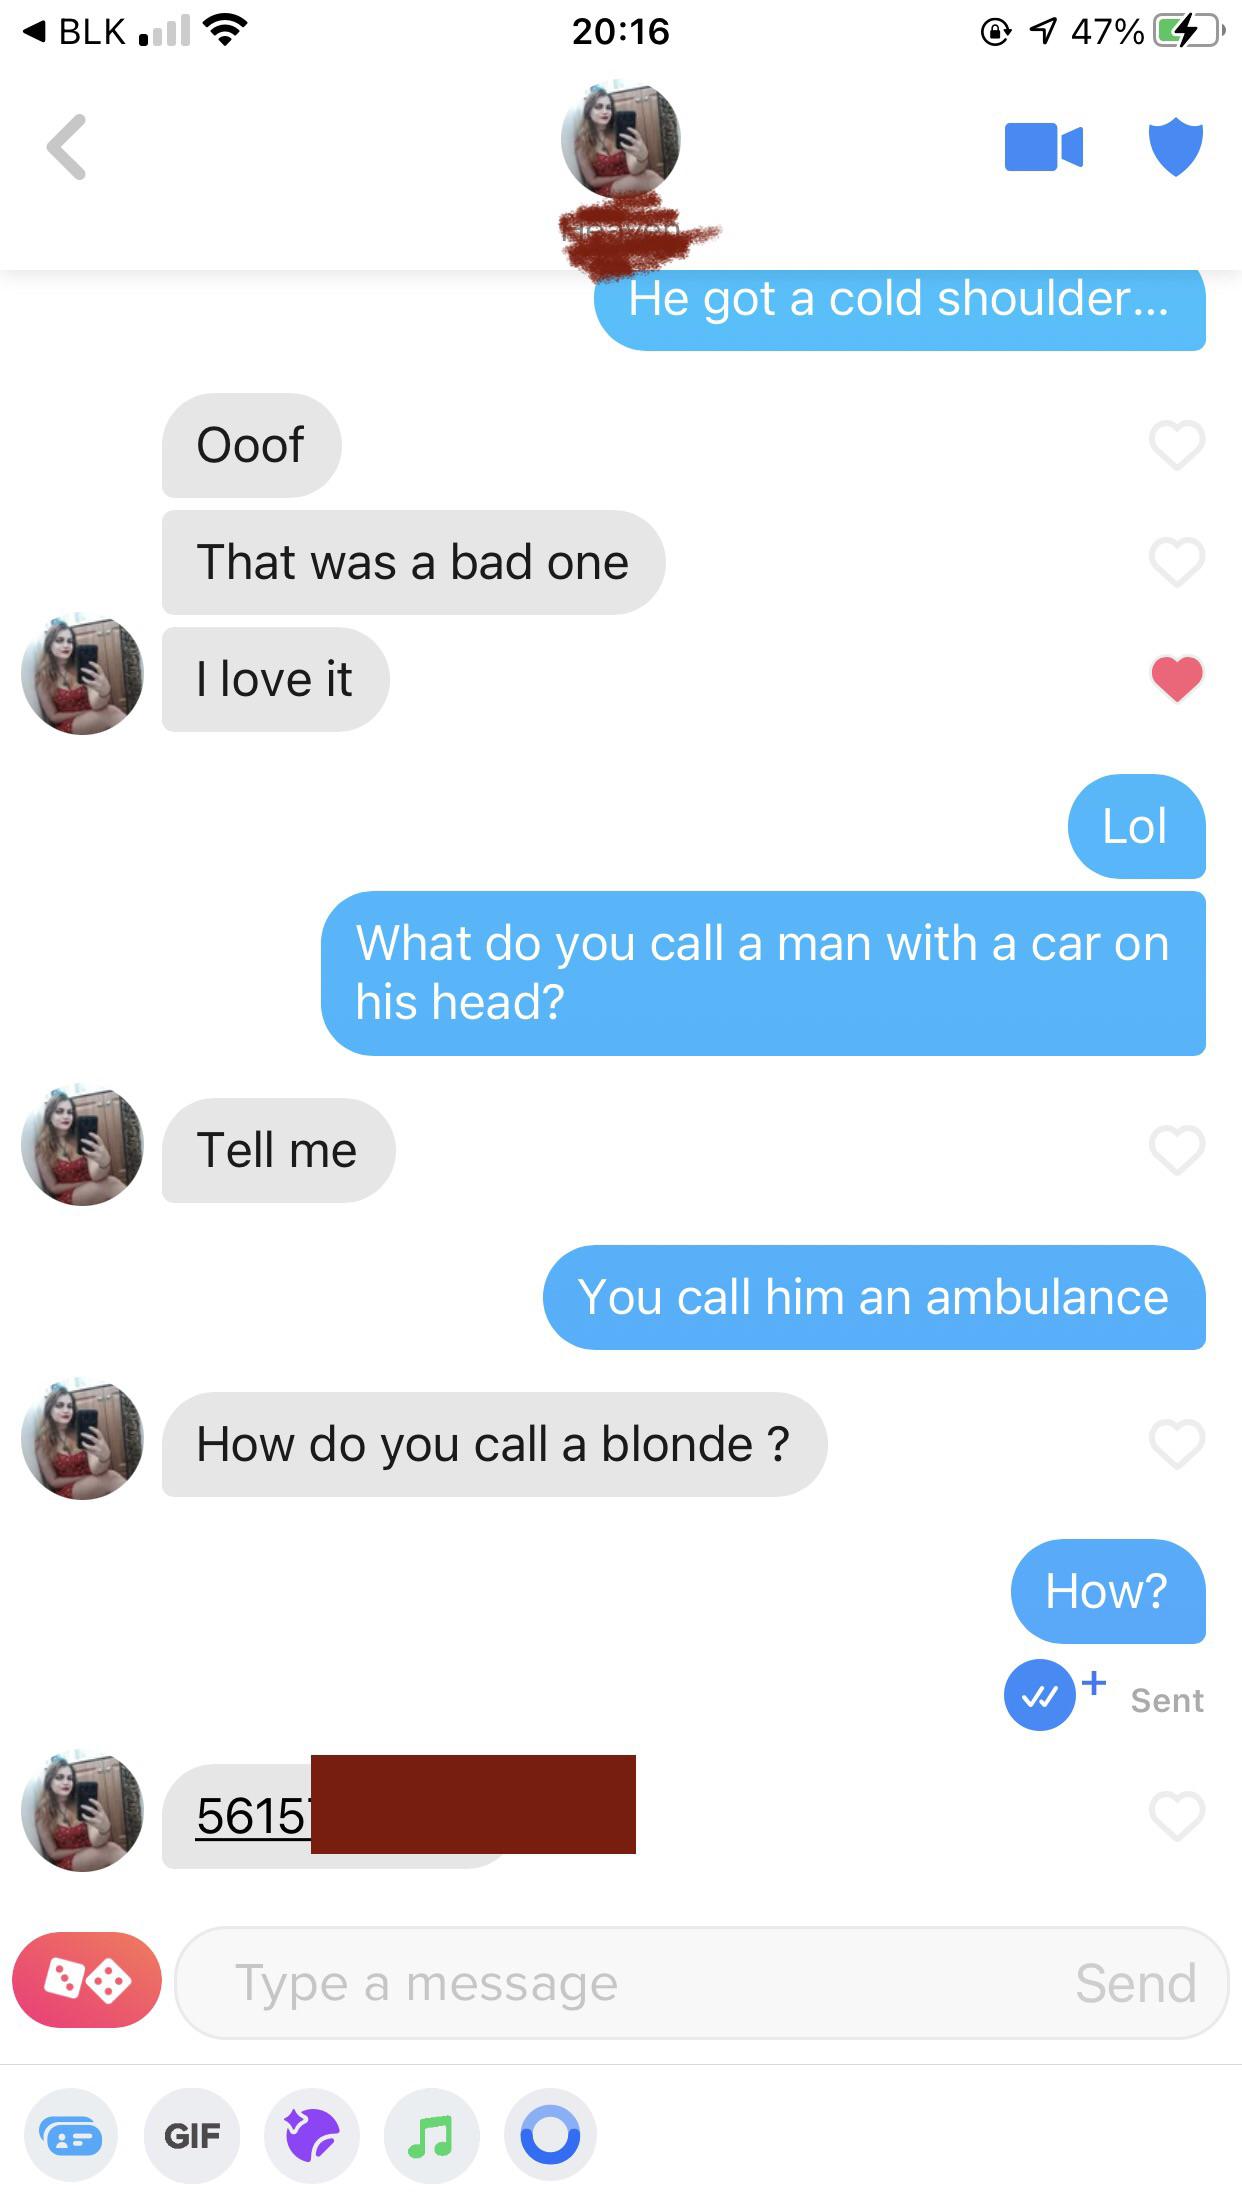 web page - Blk . Il @ 747%C4 He got a cold shoulder... Ooof That was a bad one 0 I love it Lol What do you call a man with a car on his head? ll Tell me You call him an ambulance How do you call a blonde ? How? Sent 10 5615 Type a message Send 1.. Gif